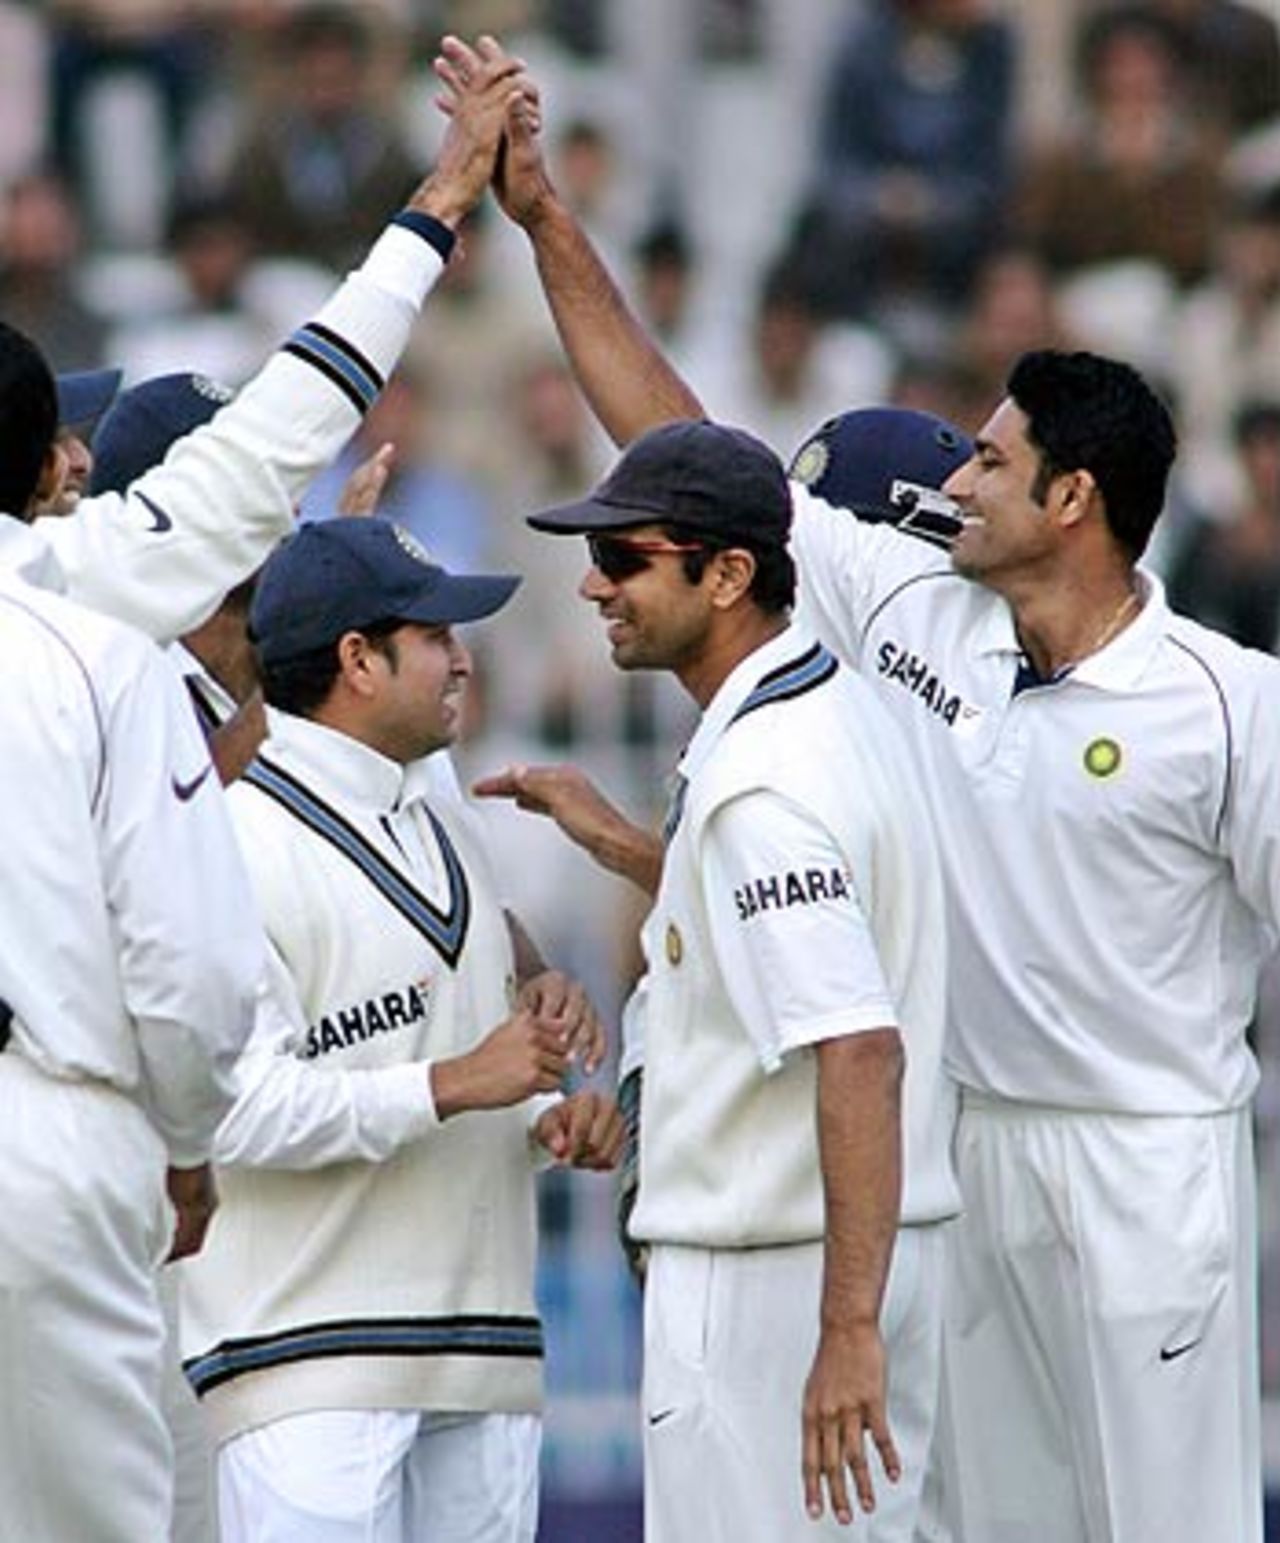 The Indian players celebrate the wicket of Salman Butt, Pakistan v India, 2nd Test, 4th day, Faisalabad, January 24 2006